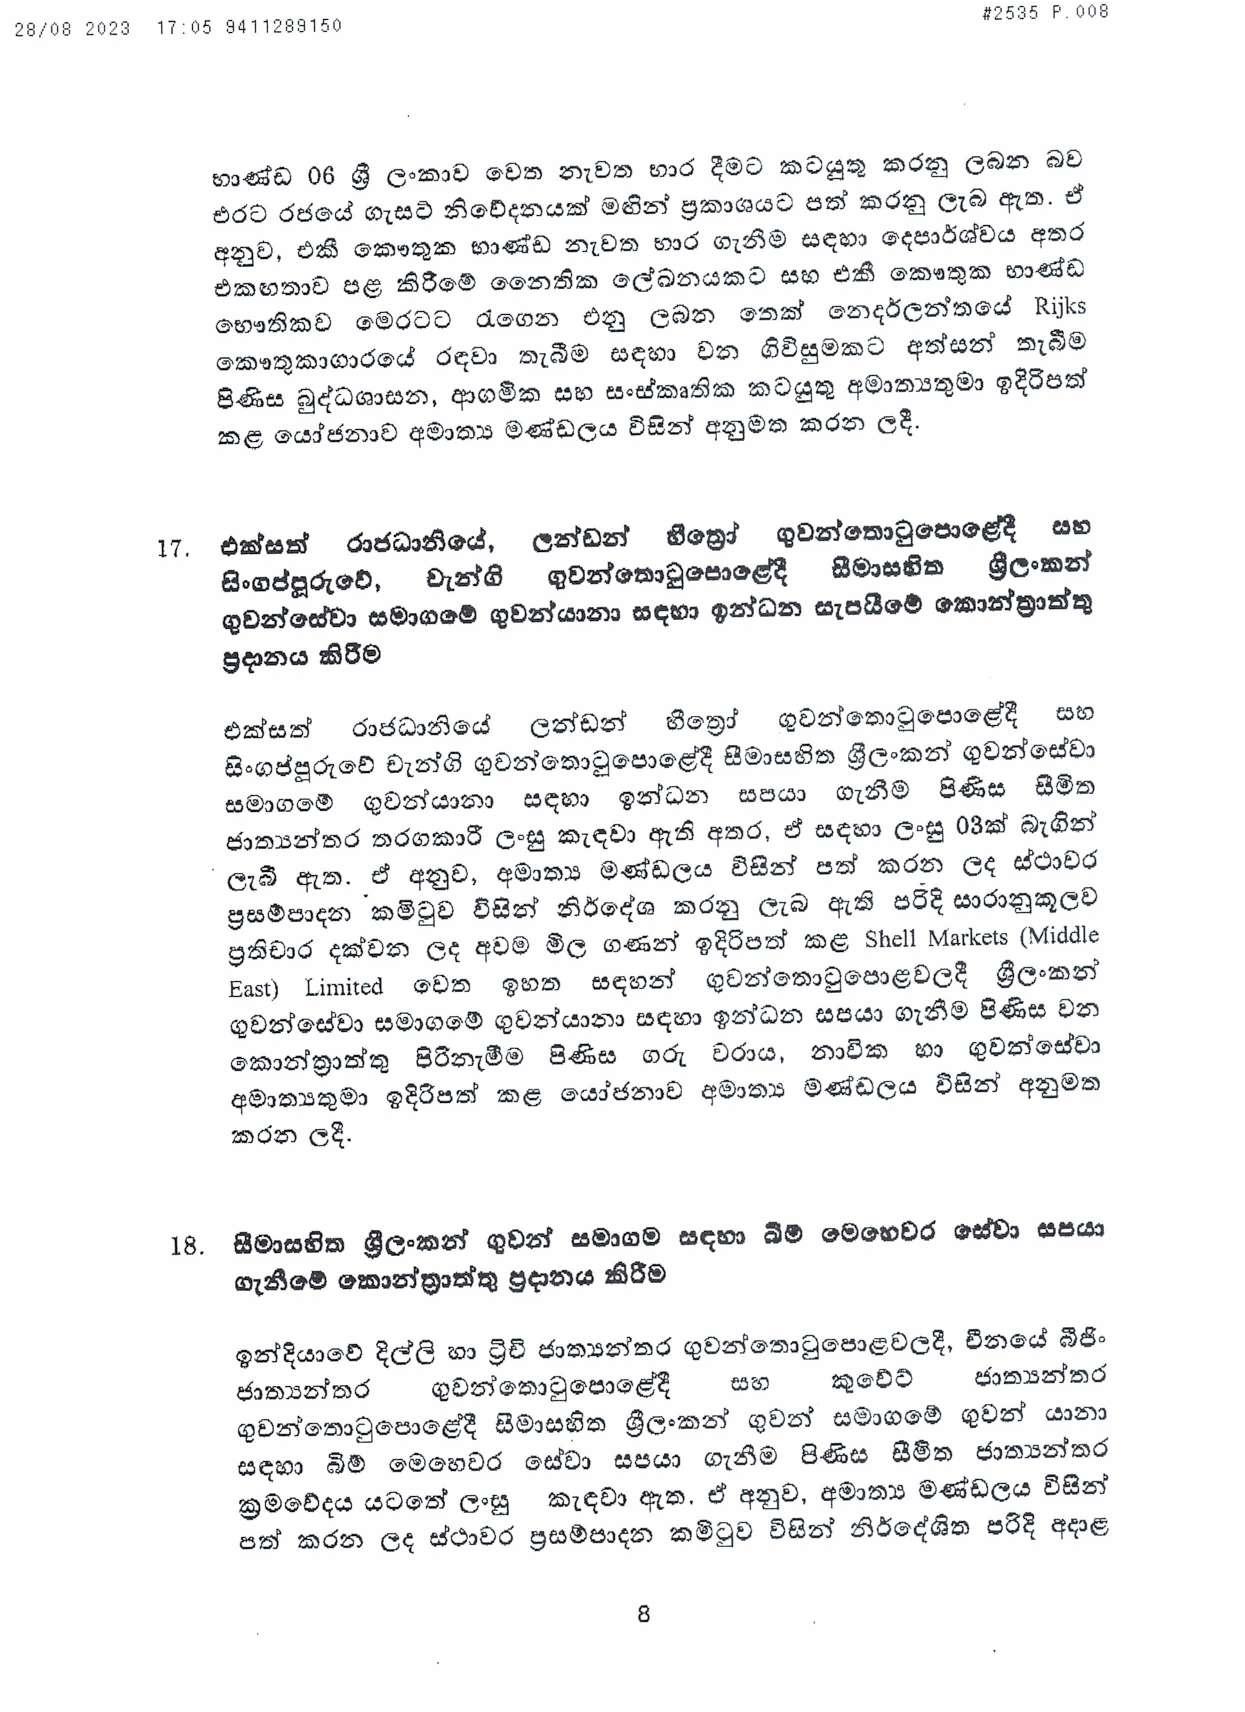 Cabinet Decision on 28.08.2023 page 008